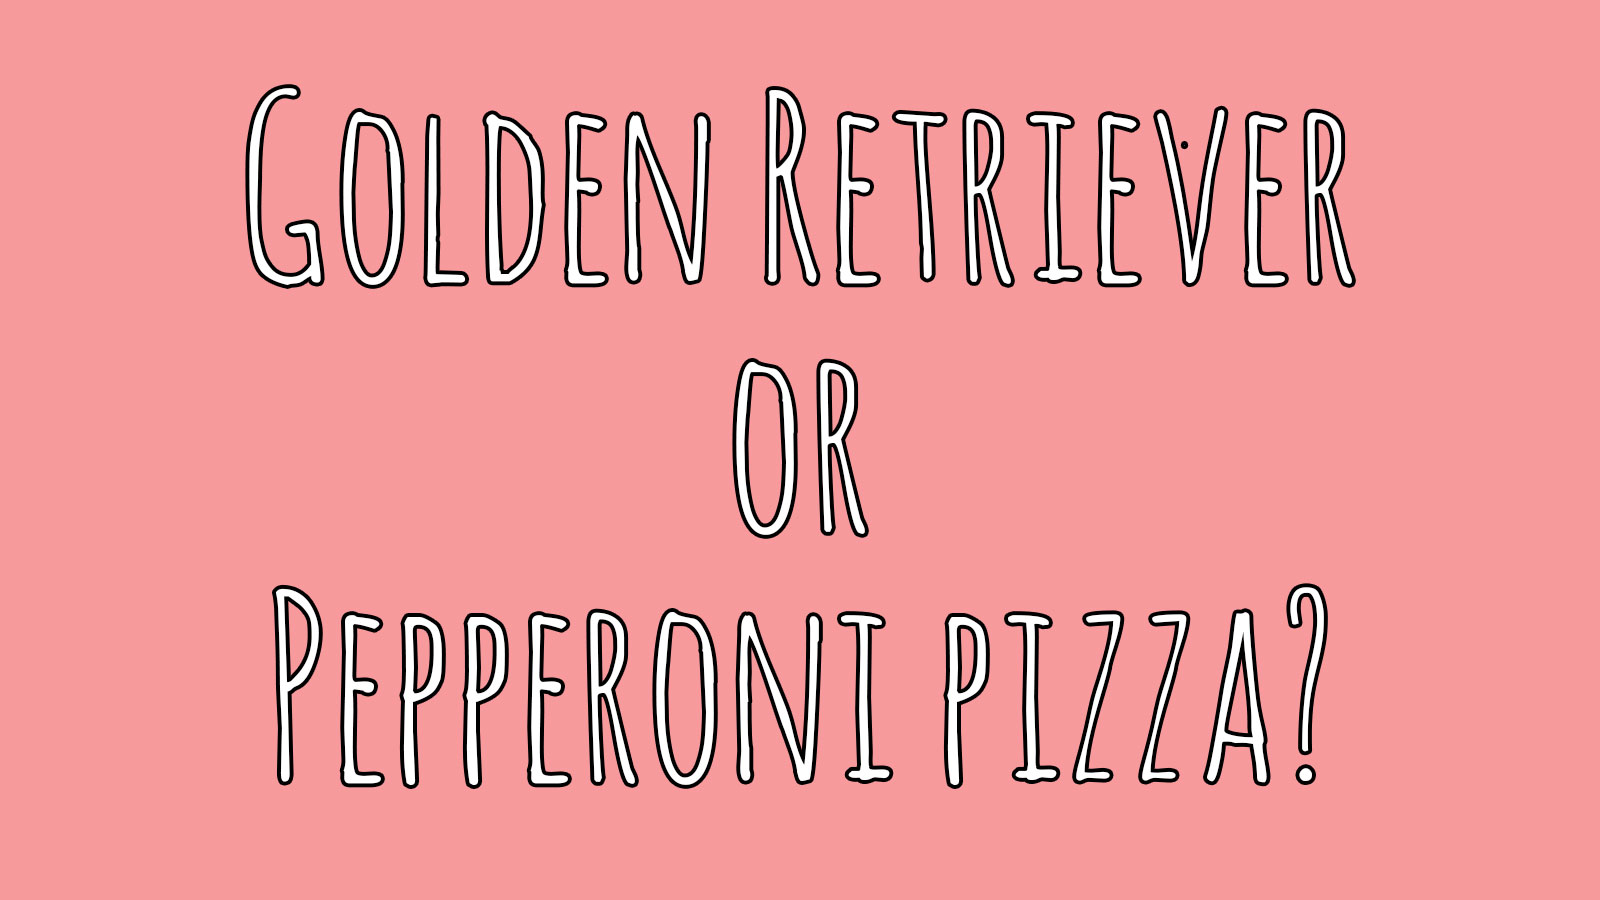 🐶 Choose Between Puppies and Pizza and We’ll Reveal Your Introvert/Extrovert Percentage 🍕 150